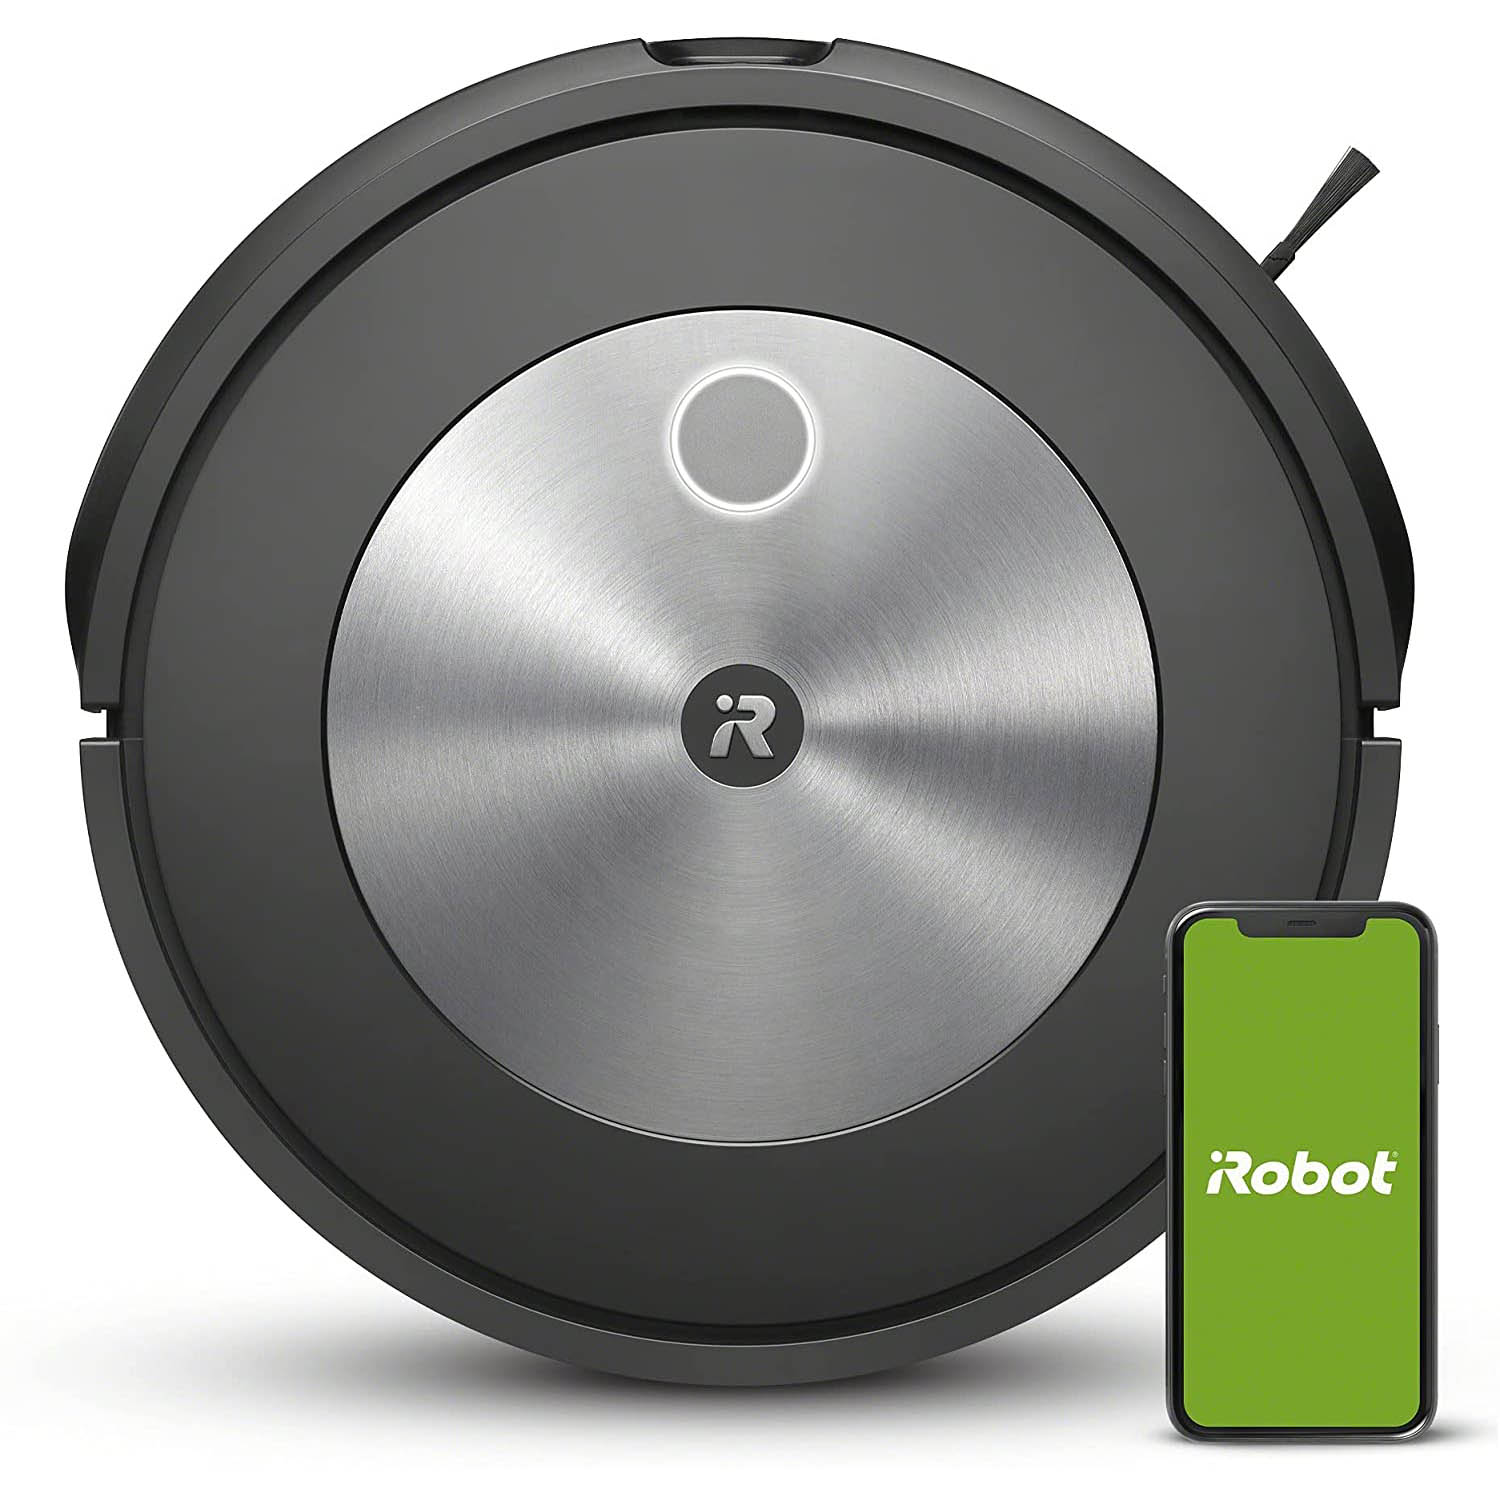 iRobot Roomba j7 7150 Wi-Fi Connected Robot Vacuum $399, Bundle $419 (less w/ SD cashback) + free s/h at Buydig